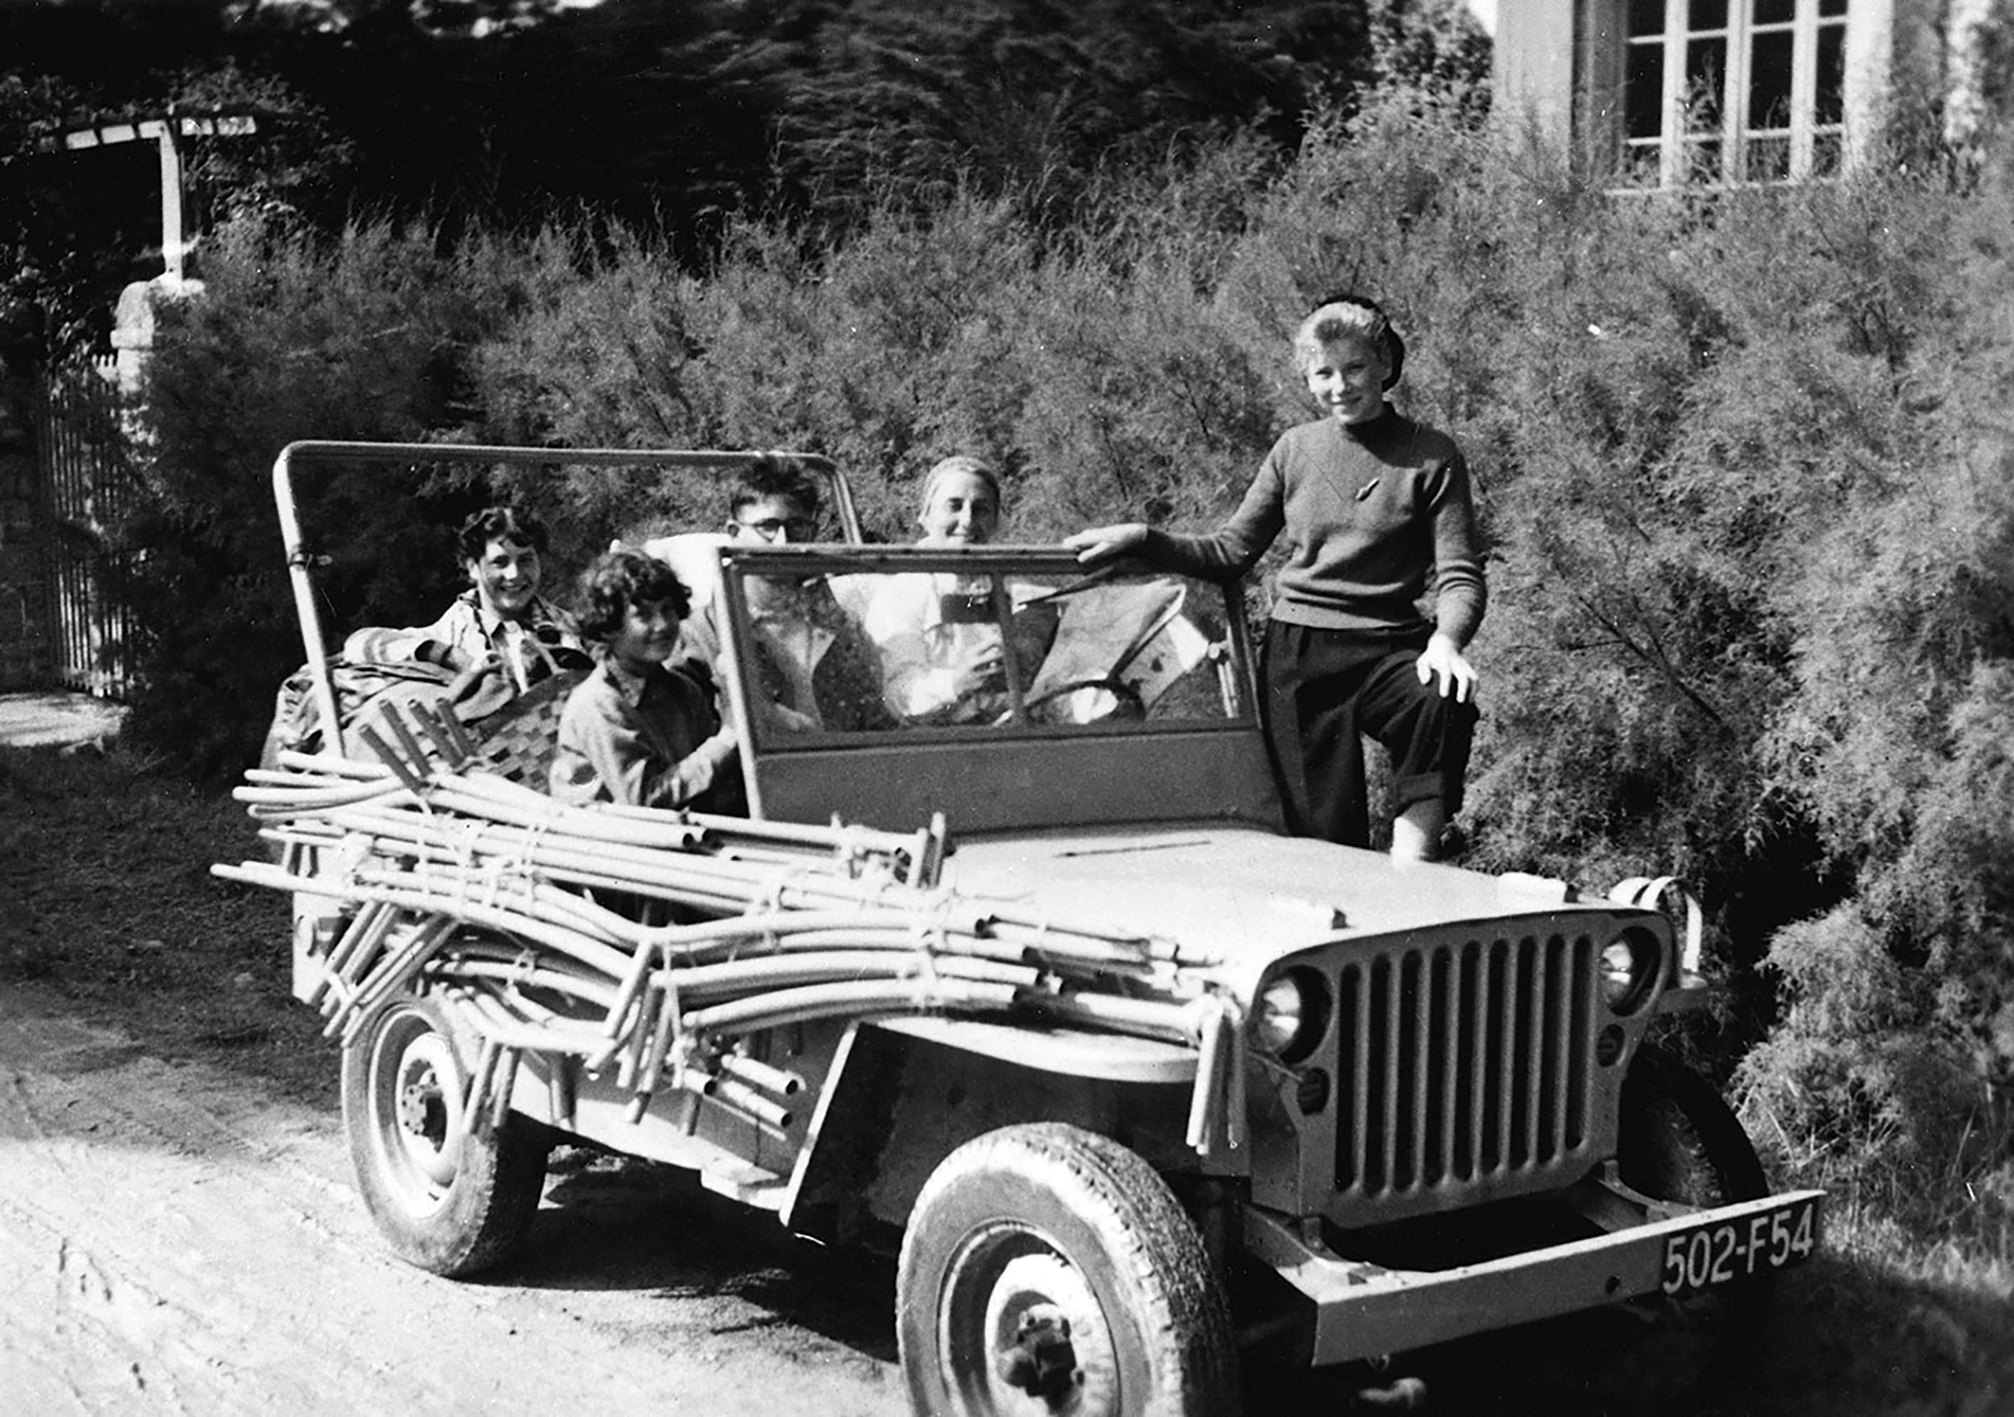 The Prouvé family on holiday with the frame of the “Papillon” (Butterfly) tent strapped to a jeep, ca. 1950.